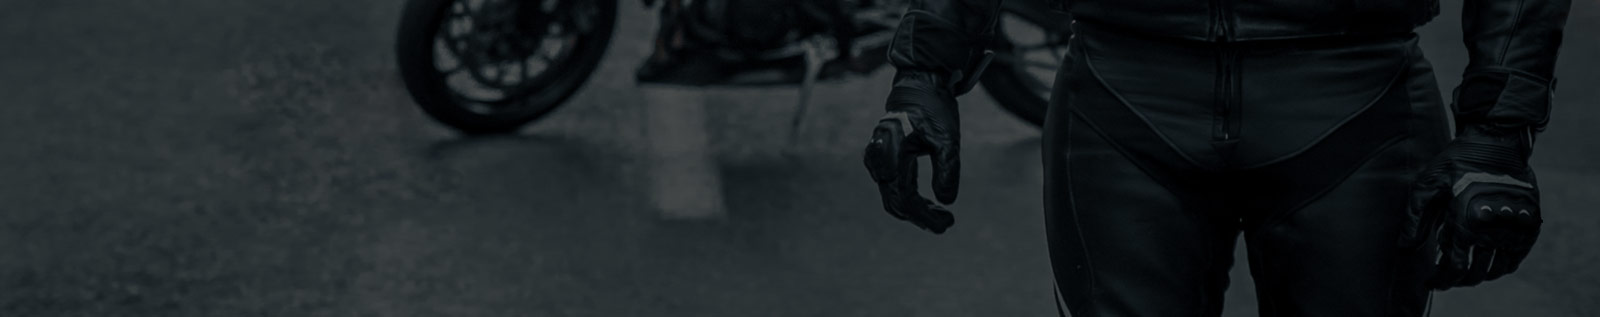 High-Quality Motorbike Gloves for Enhanced Riding Safety and Comfort.